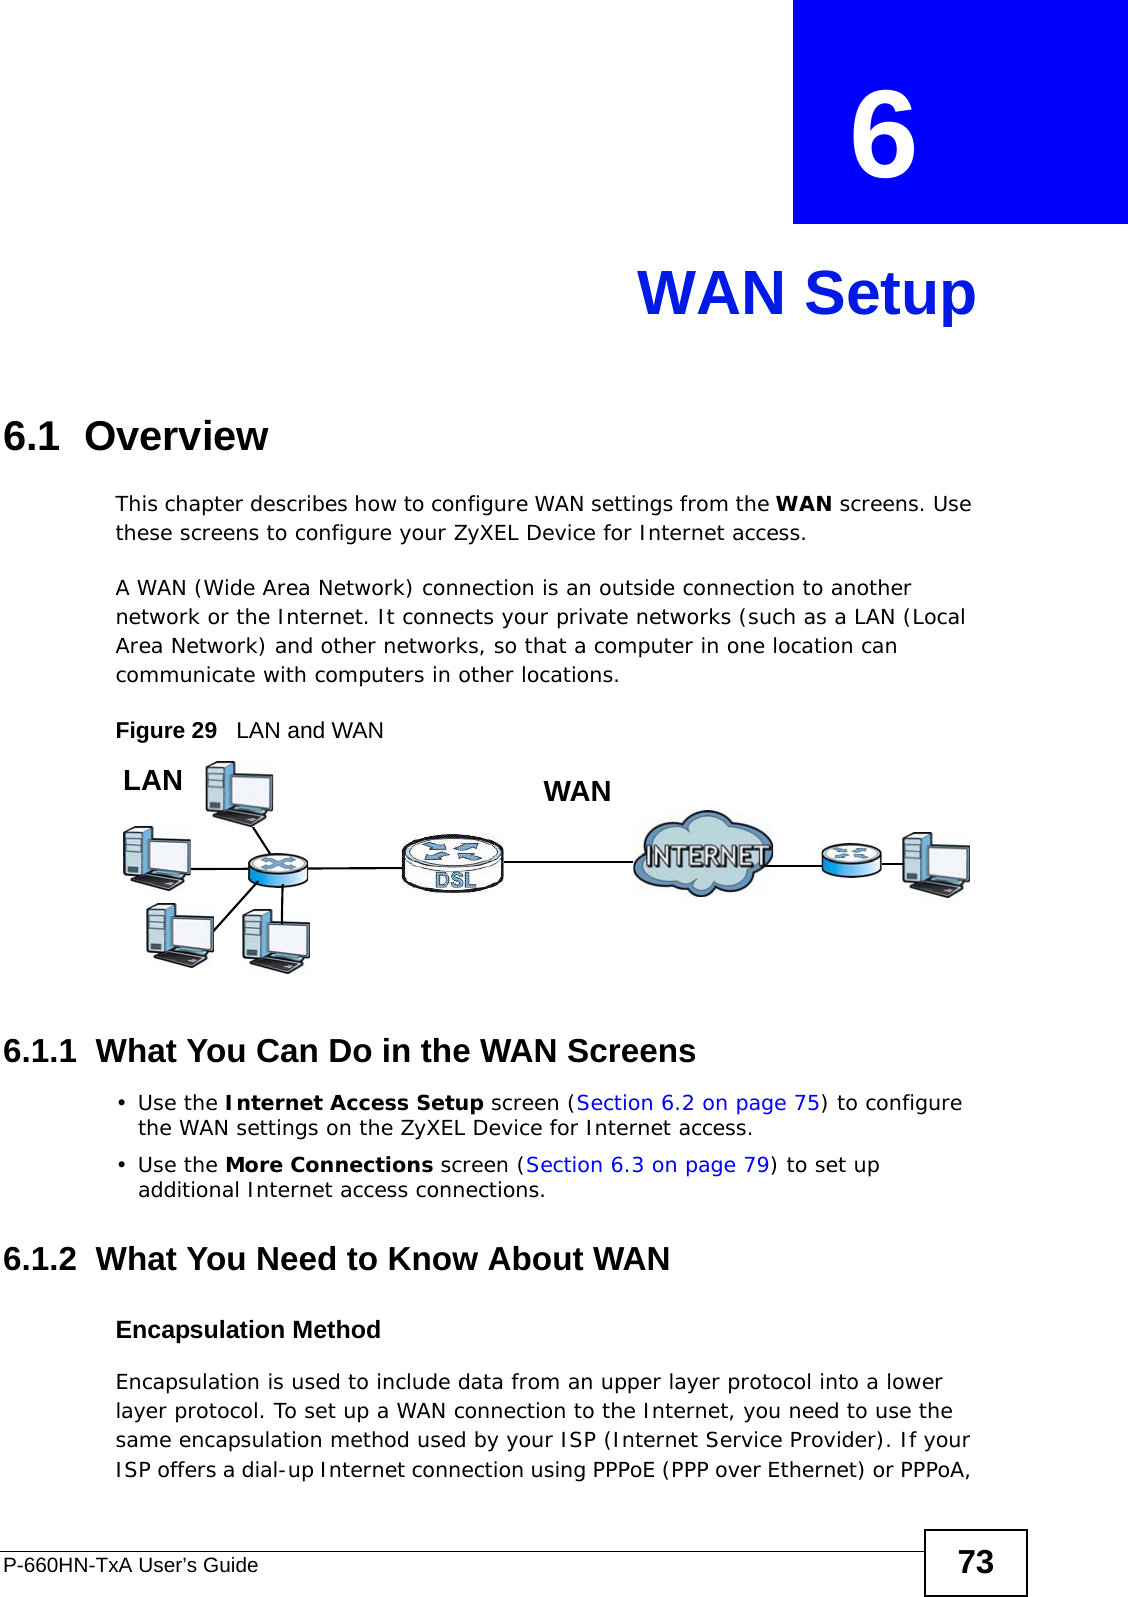 P-660HN-TxA User’s Guide 73CHAPTER  6 WAN Setup6.1  OverviewThis chapter describes how to configure WAN settings from the WAN screens. Use these screens to configure your ZyXEL Device for Internet access.A WAN (Wide Area Network) connection is an outside connection to another network or the Internet. It connects your private networks (such as a LAN (Local Area Network) and other networks, so that a computer in one location can communicate with computers in other locations.Figure 29   LAN and WAN6.1.1  What You Can Do in the WAN Screens•Use the Internet Access Setup screen (Section 6.2 on page 75) to configure the WAN settings on the ZyXEL Device for Internet access.•Use the More Connections screen (Section 6.3 on page 79) to set up additional Internet access connections.6.1.2  What You Need to Know About WANEncapsulation MethodEncapsulation is used to include data from an upper layer protocol into a lower layer protocol. To set up a WAN connection to the Internet, you need to use the same encapsulation method used by your ISP (Internet Service Provider). If your ISP offers a dial-up Internet connection using PPPoE (PPP over Ethernet) or PPPoA, WANLAN